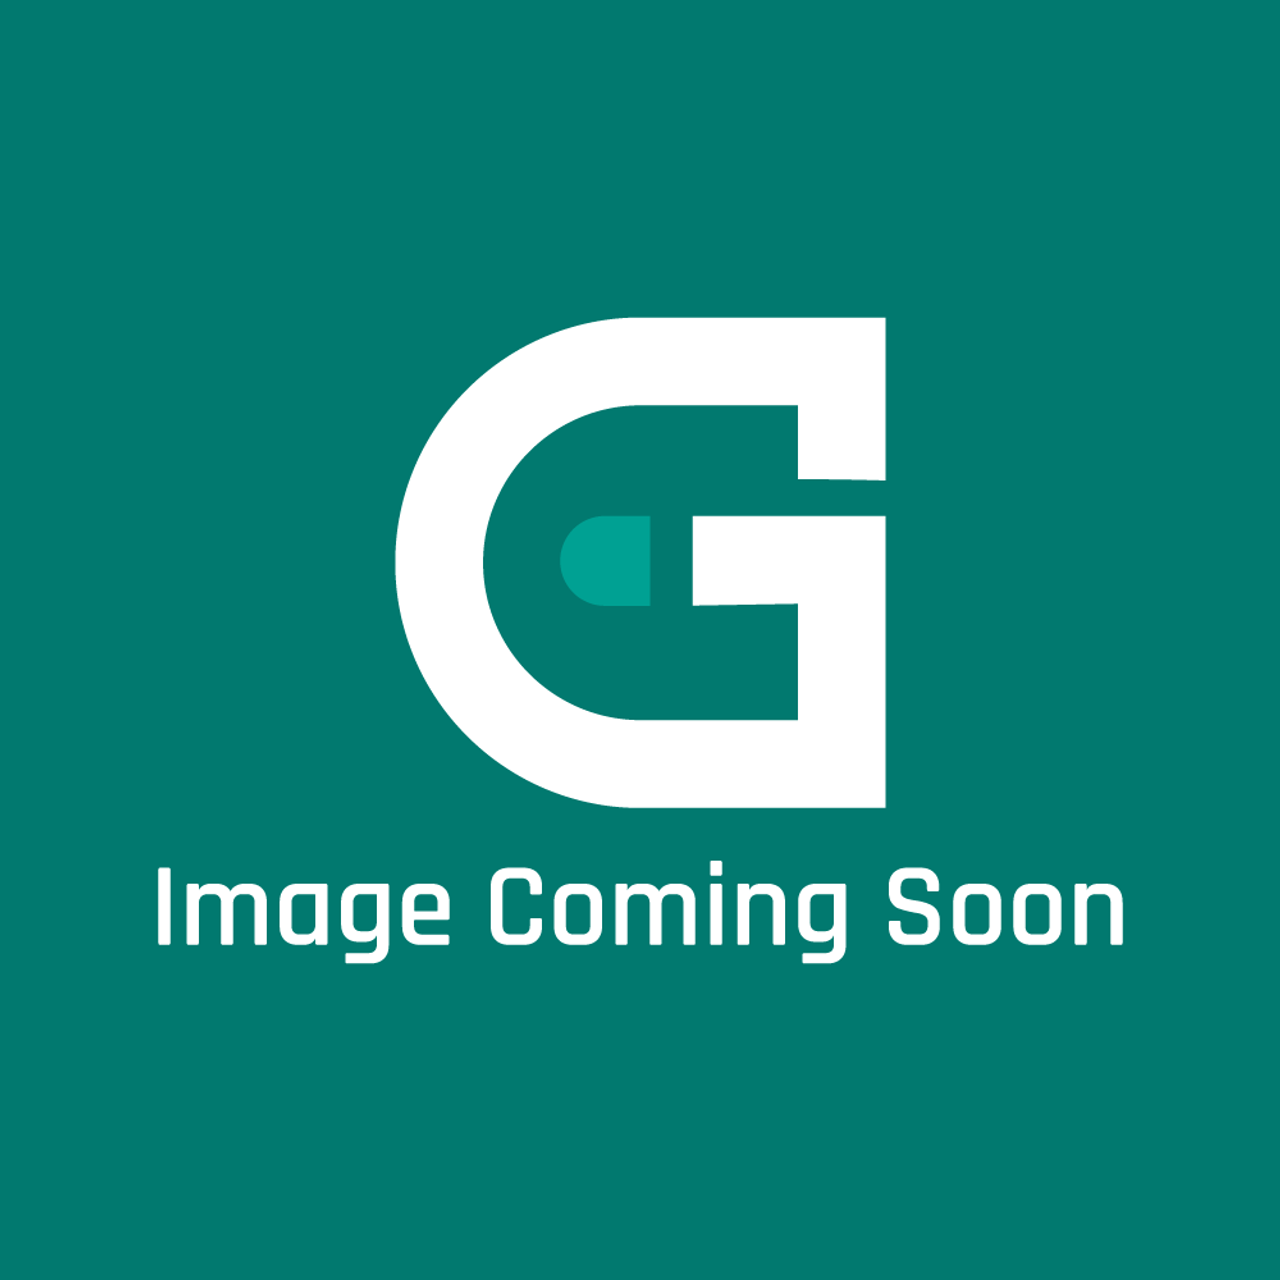 Garland CK4515638 - Cover-Combustion Chamber Part - Image Coming Soon!